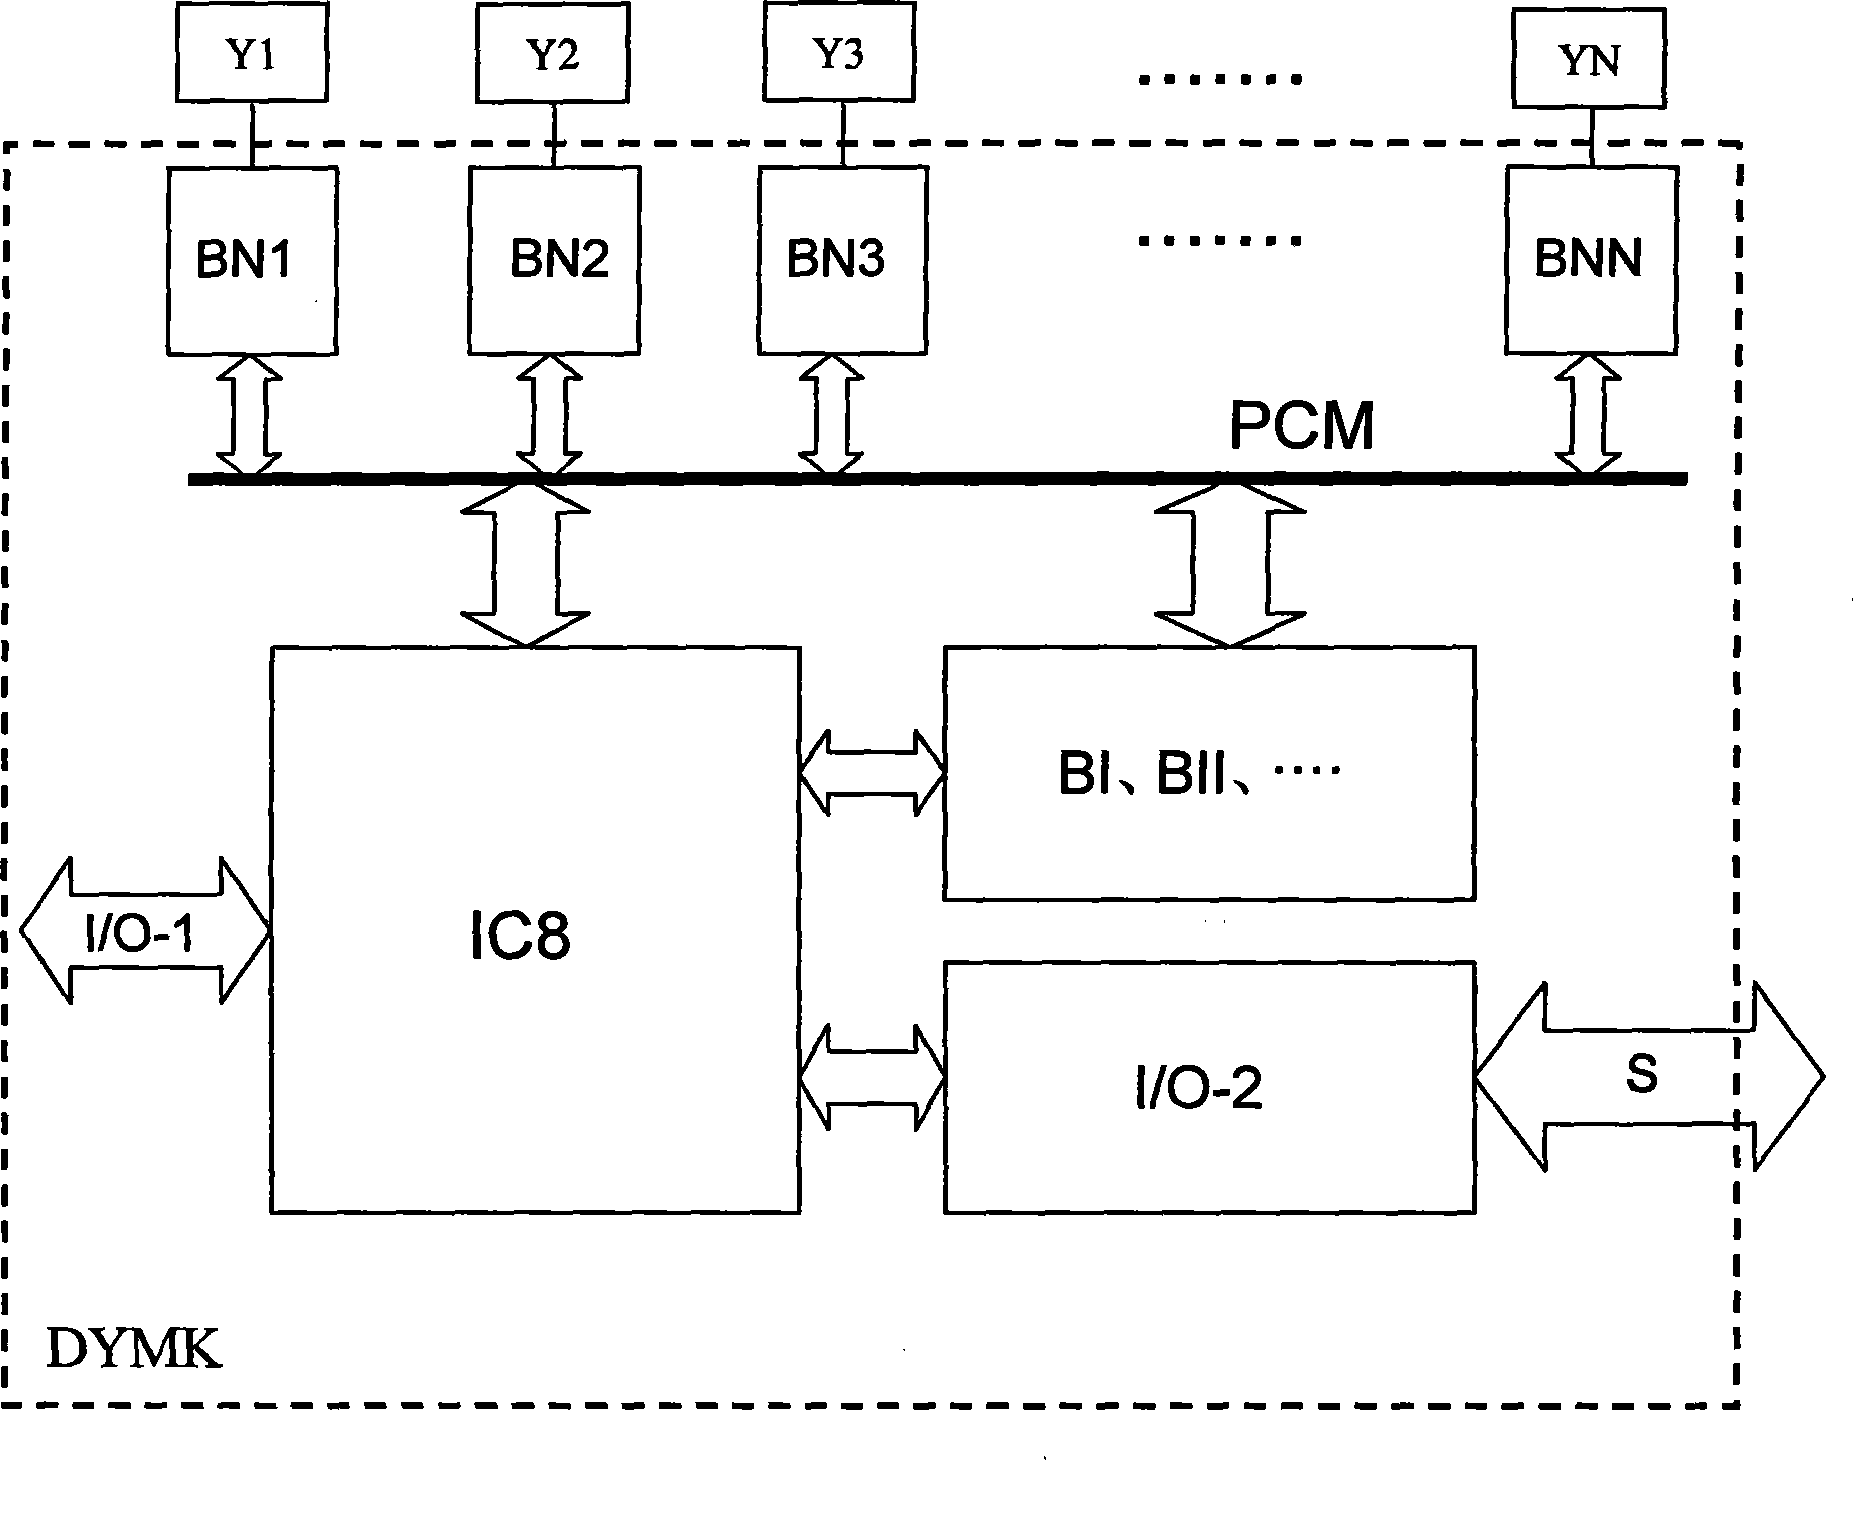 Distributed scheduling communication device